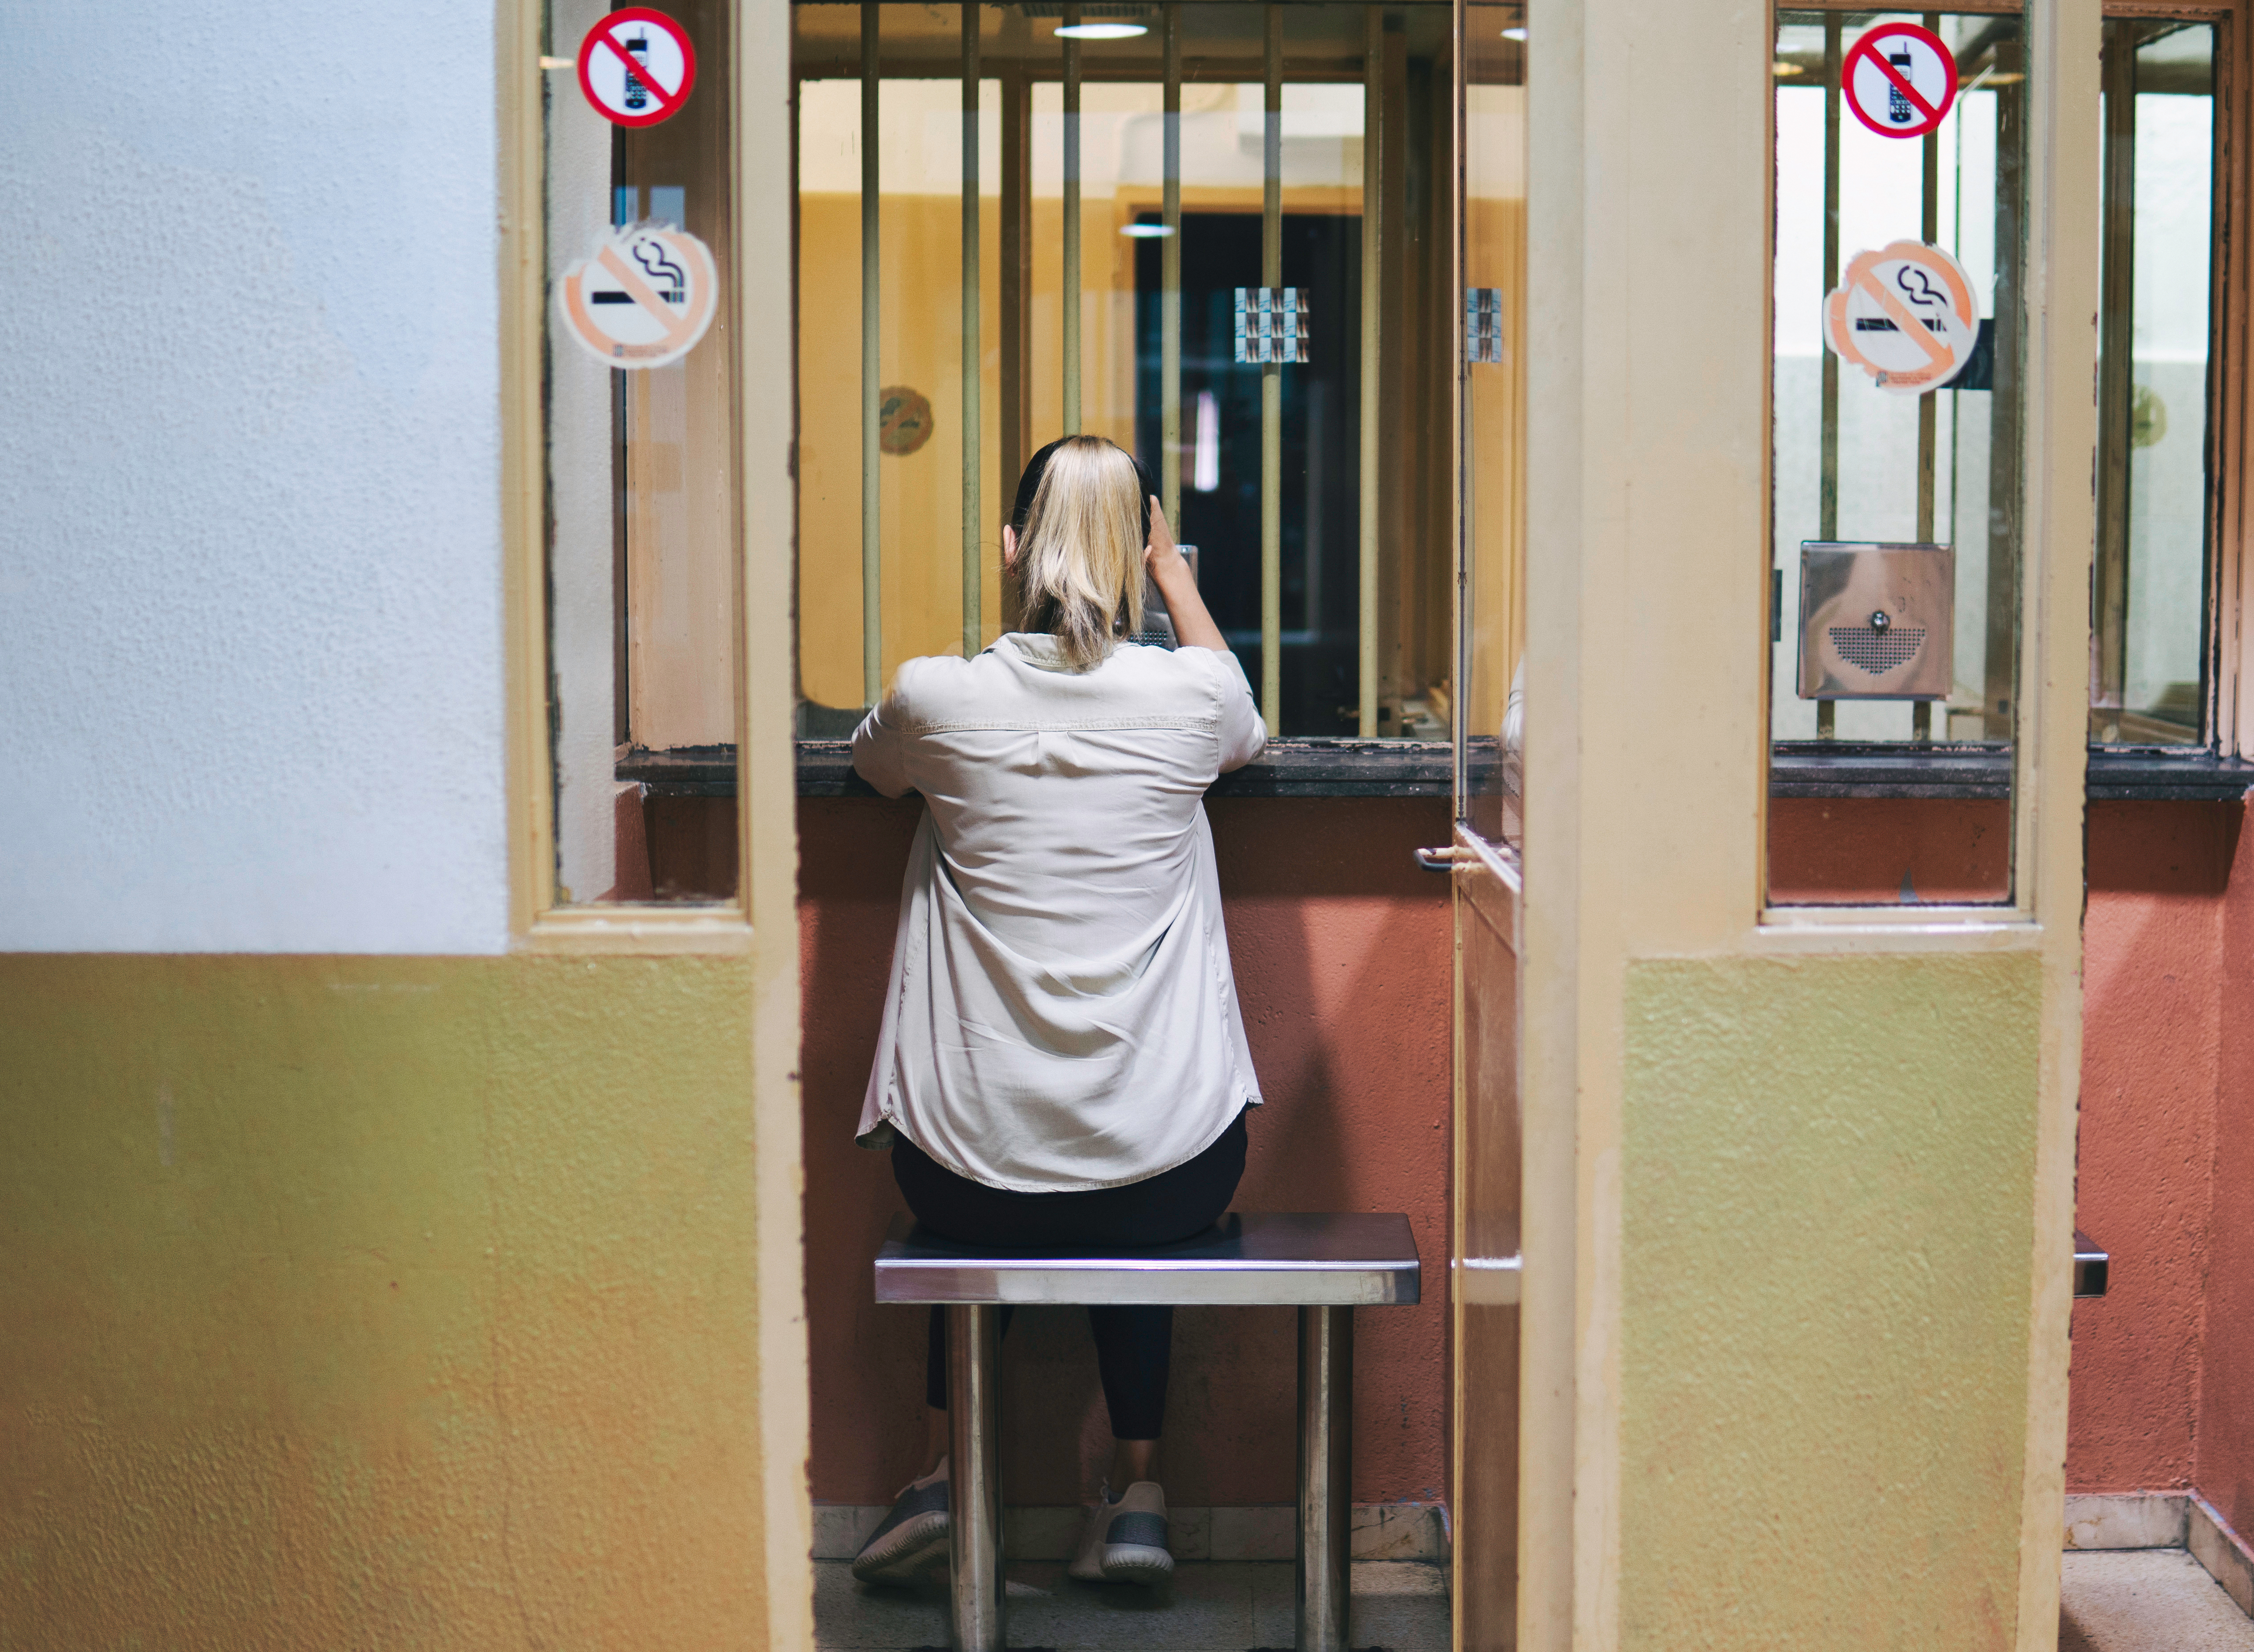 Young girl or woman looking forward to meeting a prisoner. | Source: Shutterstock